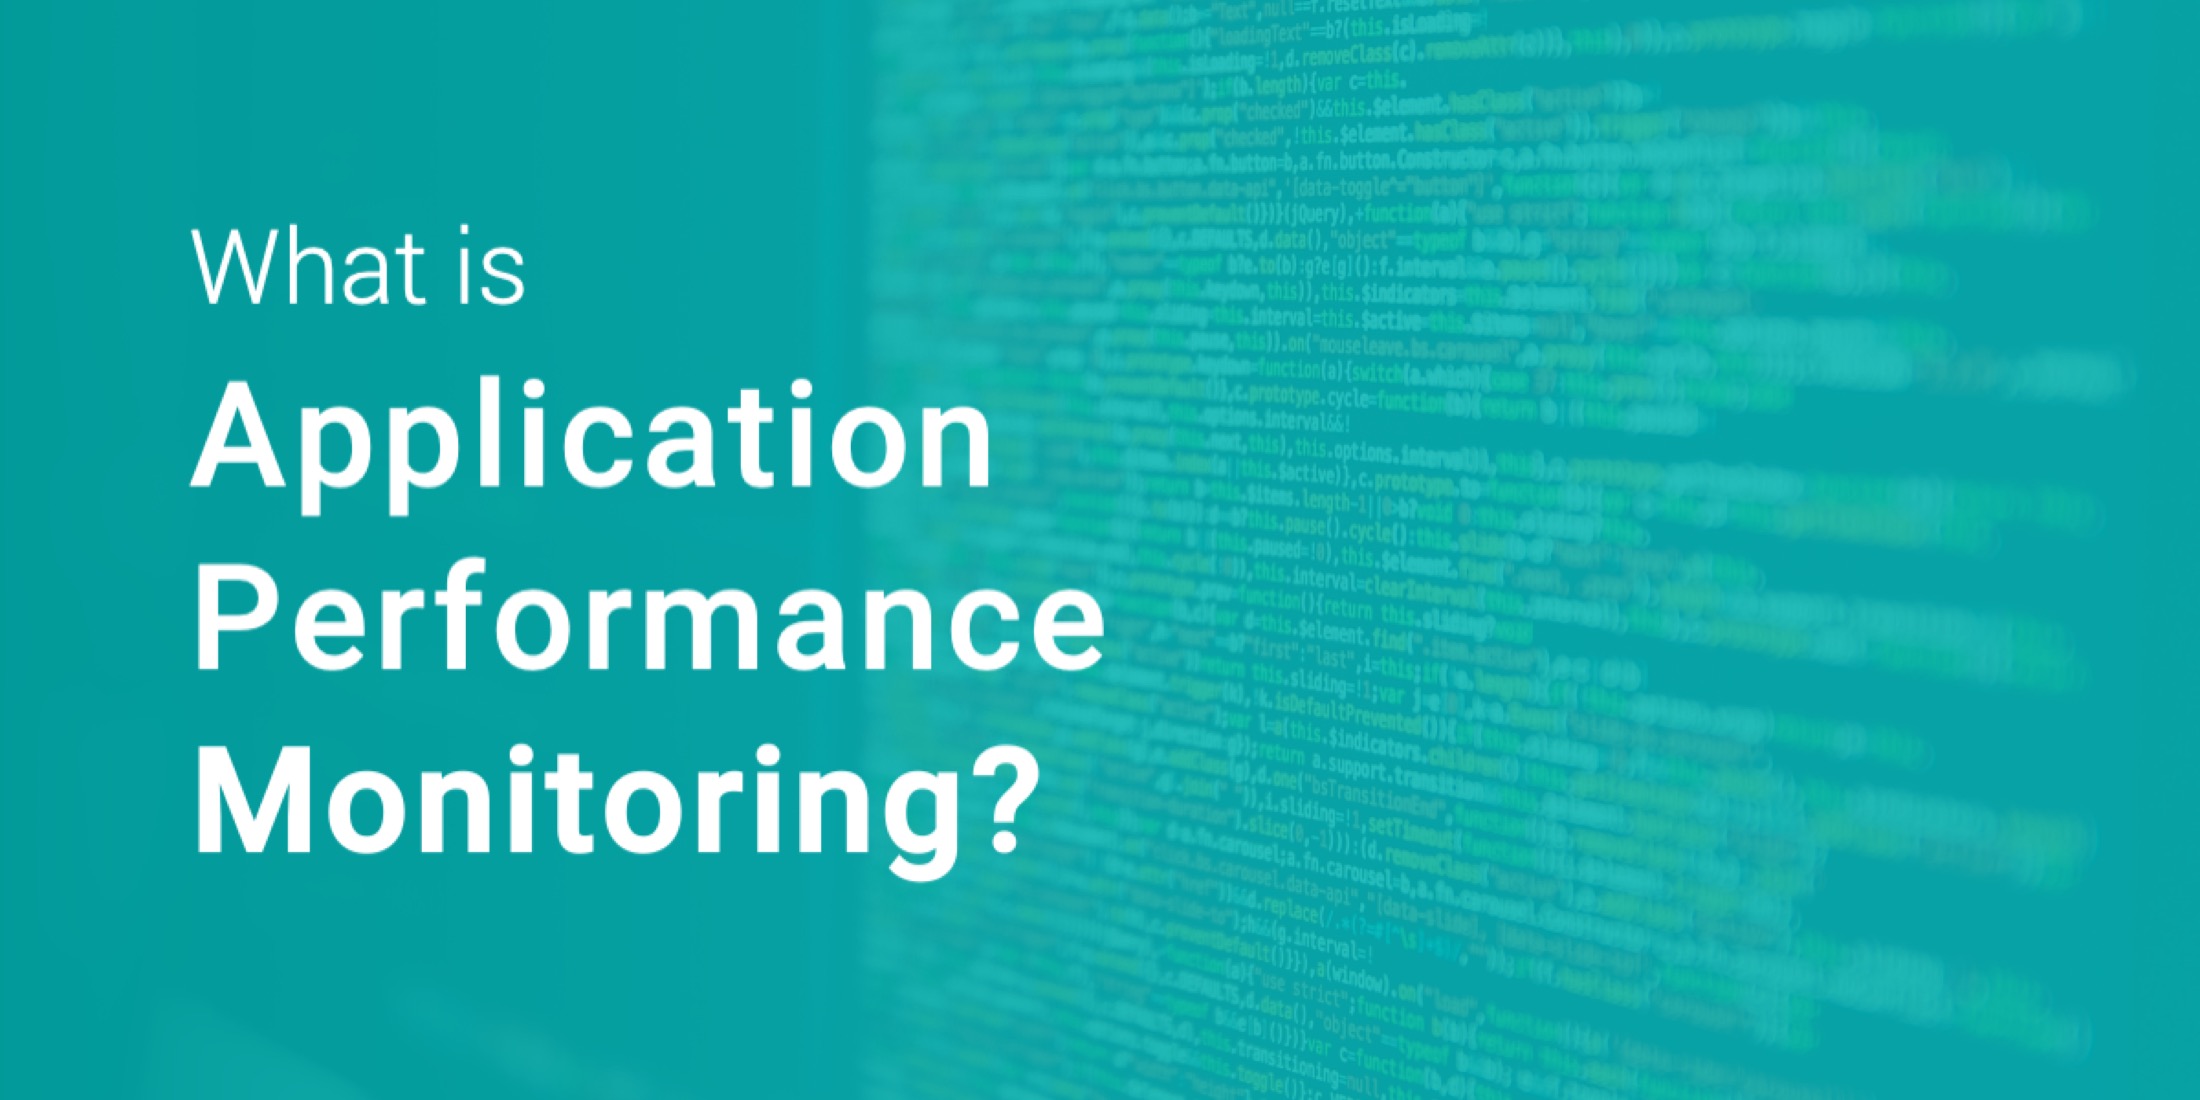 What is Application Performance Monitoring? image